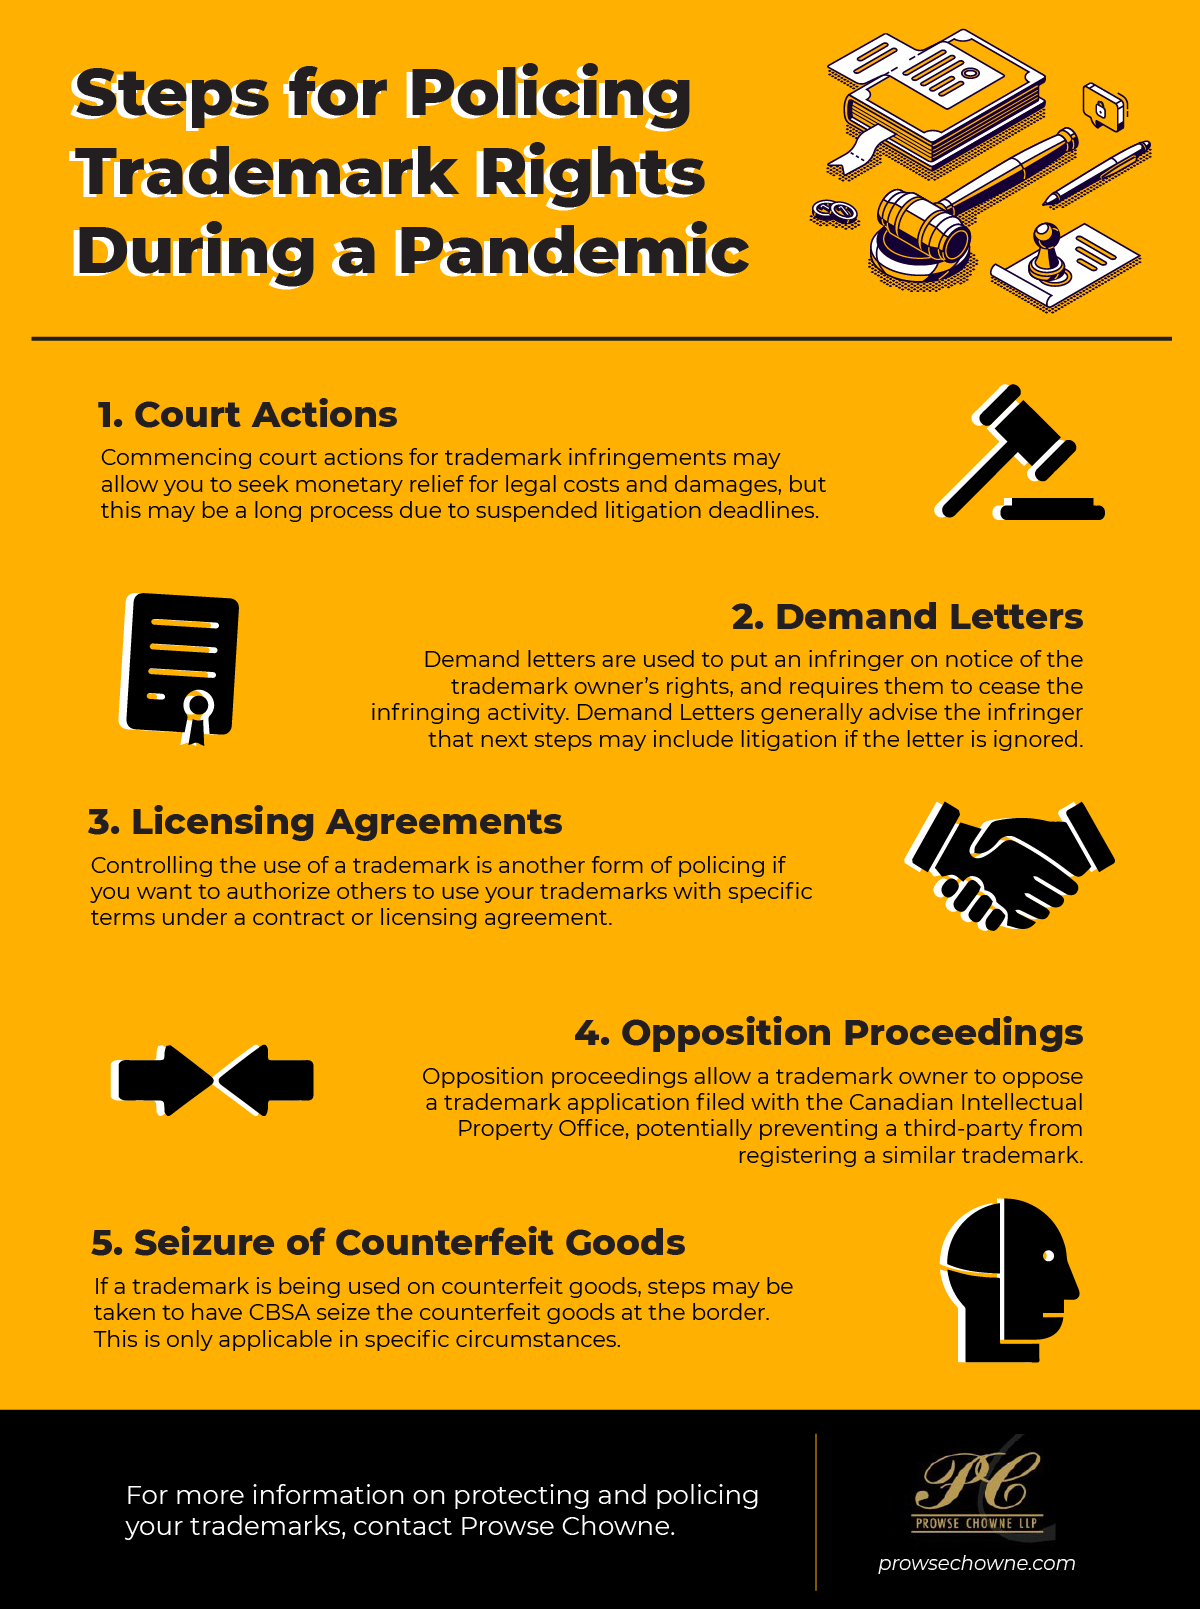 Steps for Policing Trademark Rights During a Pandemic